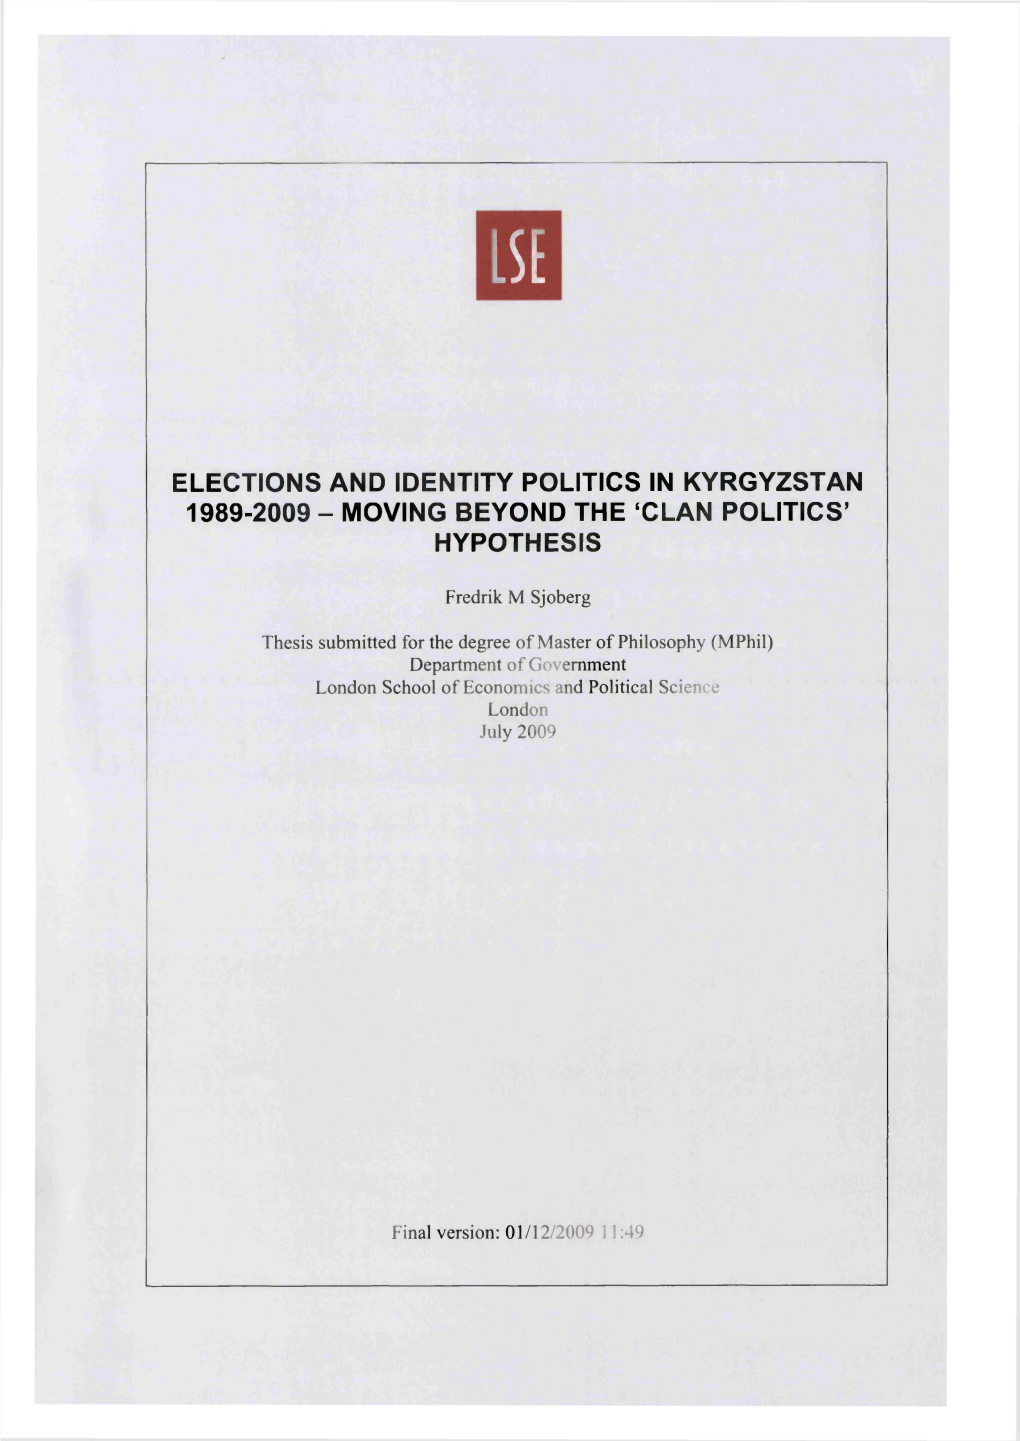 Elections and Identity Politics in Kyrgyzstan 1989-2009 - Moving Beyond the ‘Clan Politics’ Hypothesis